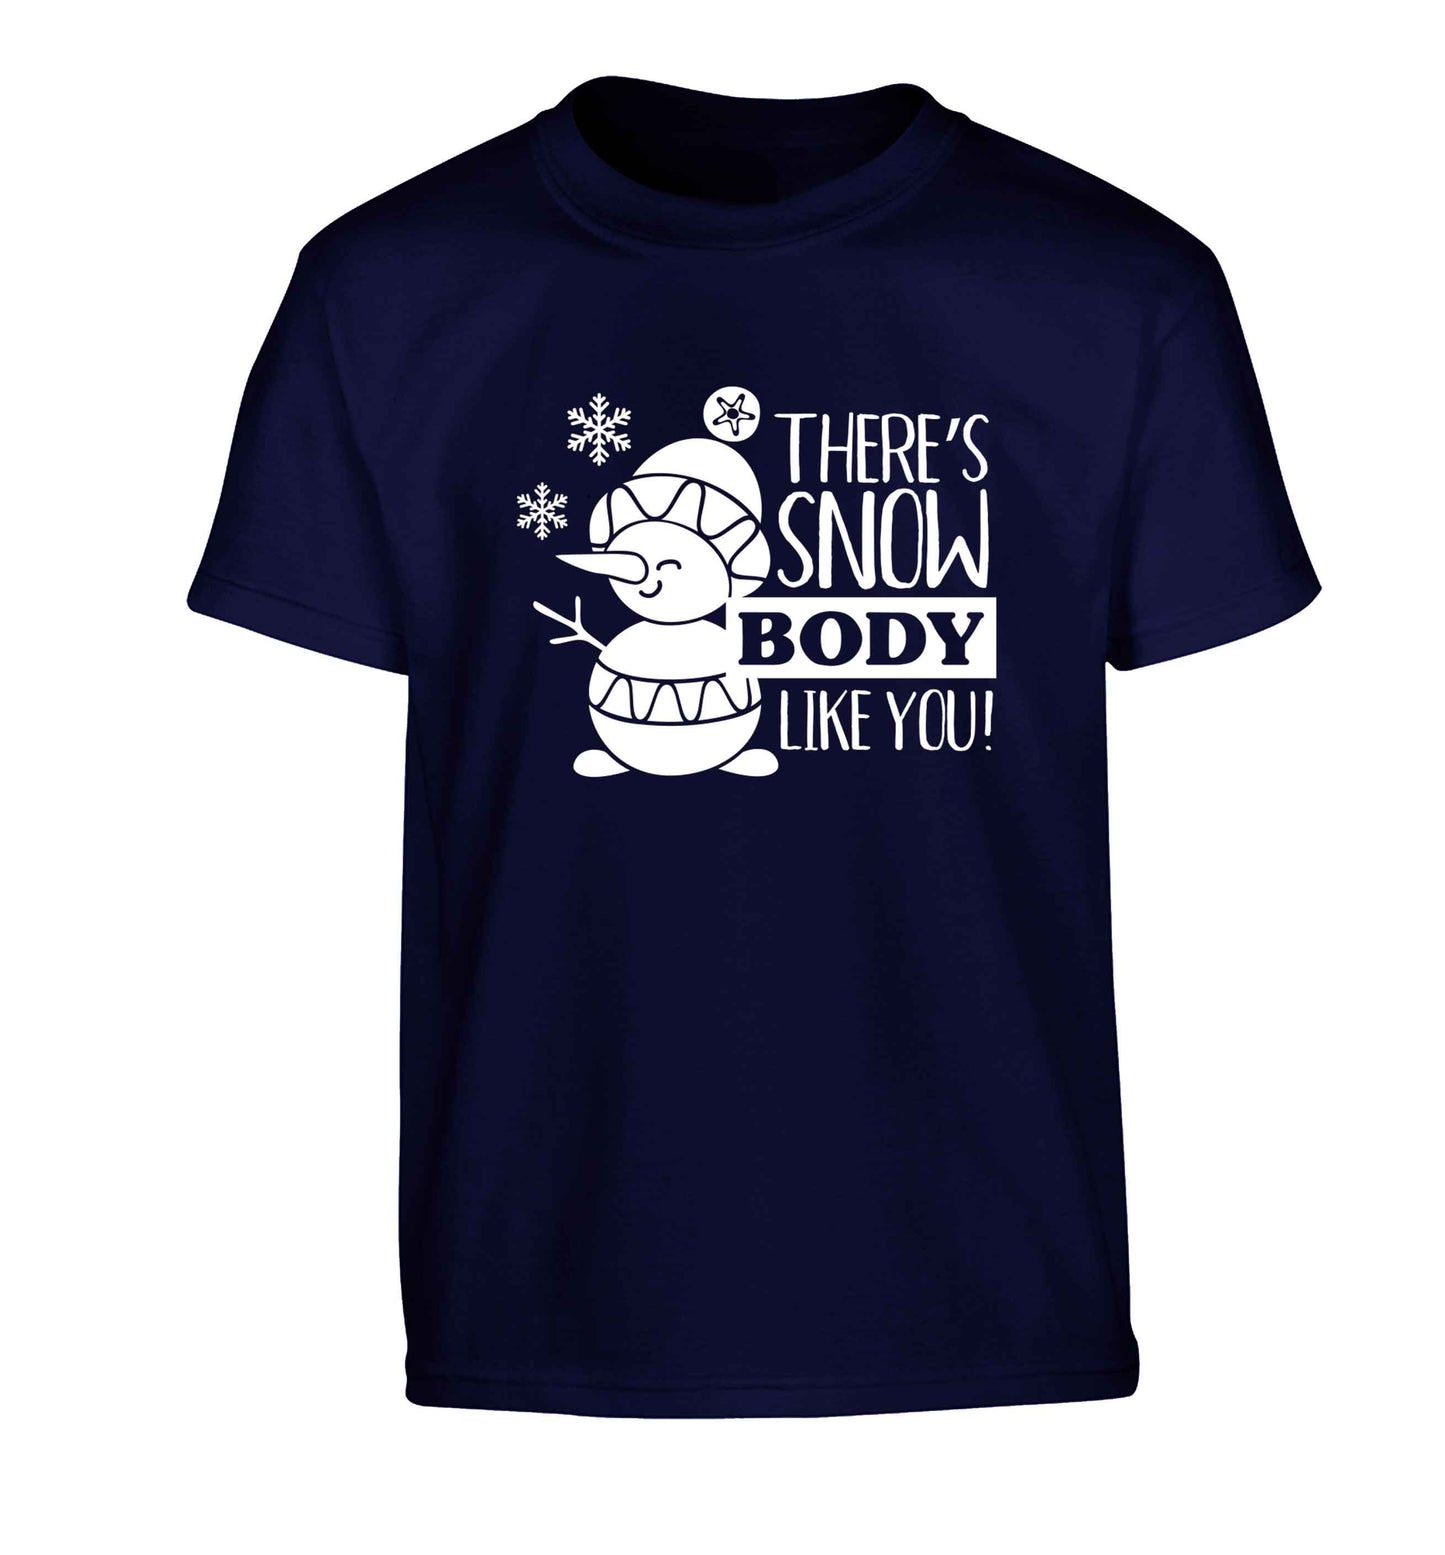 There's snow body like you Children's navy Tshirt 12-13 Years